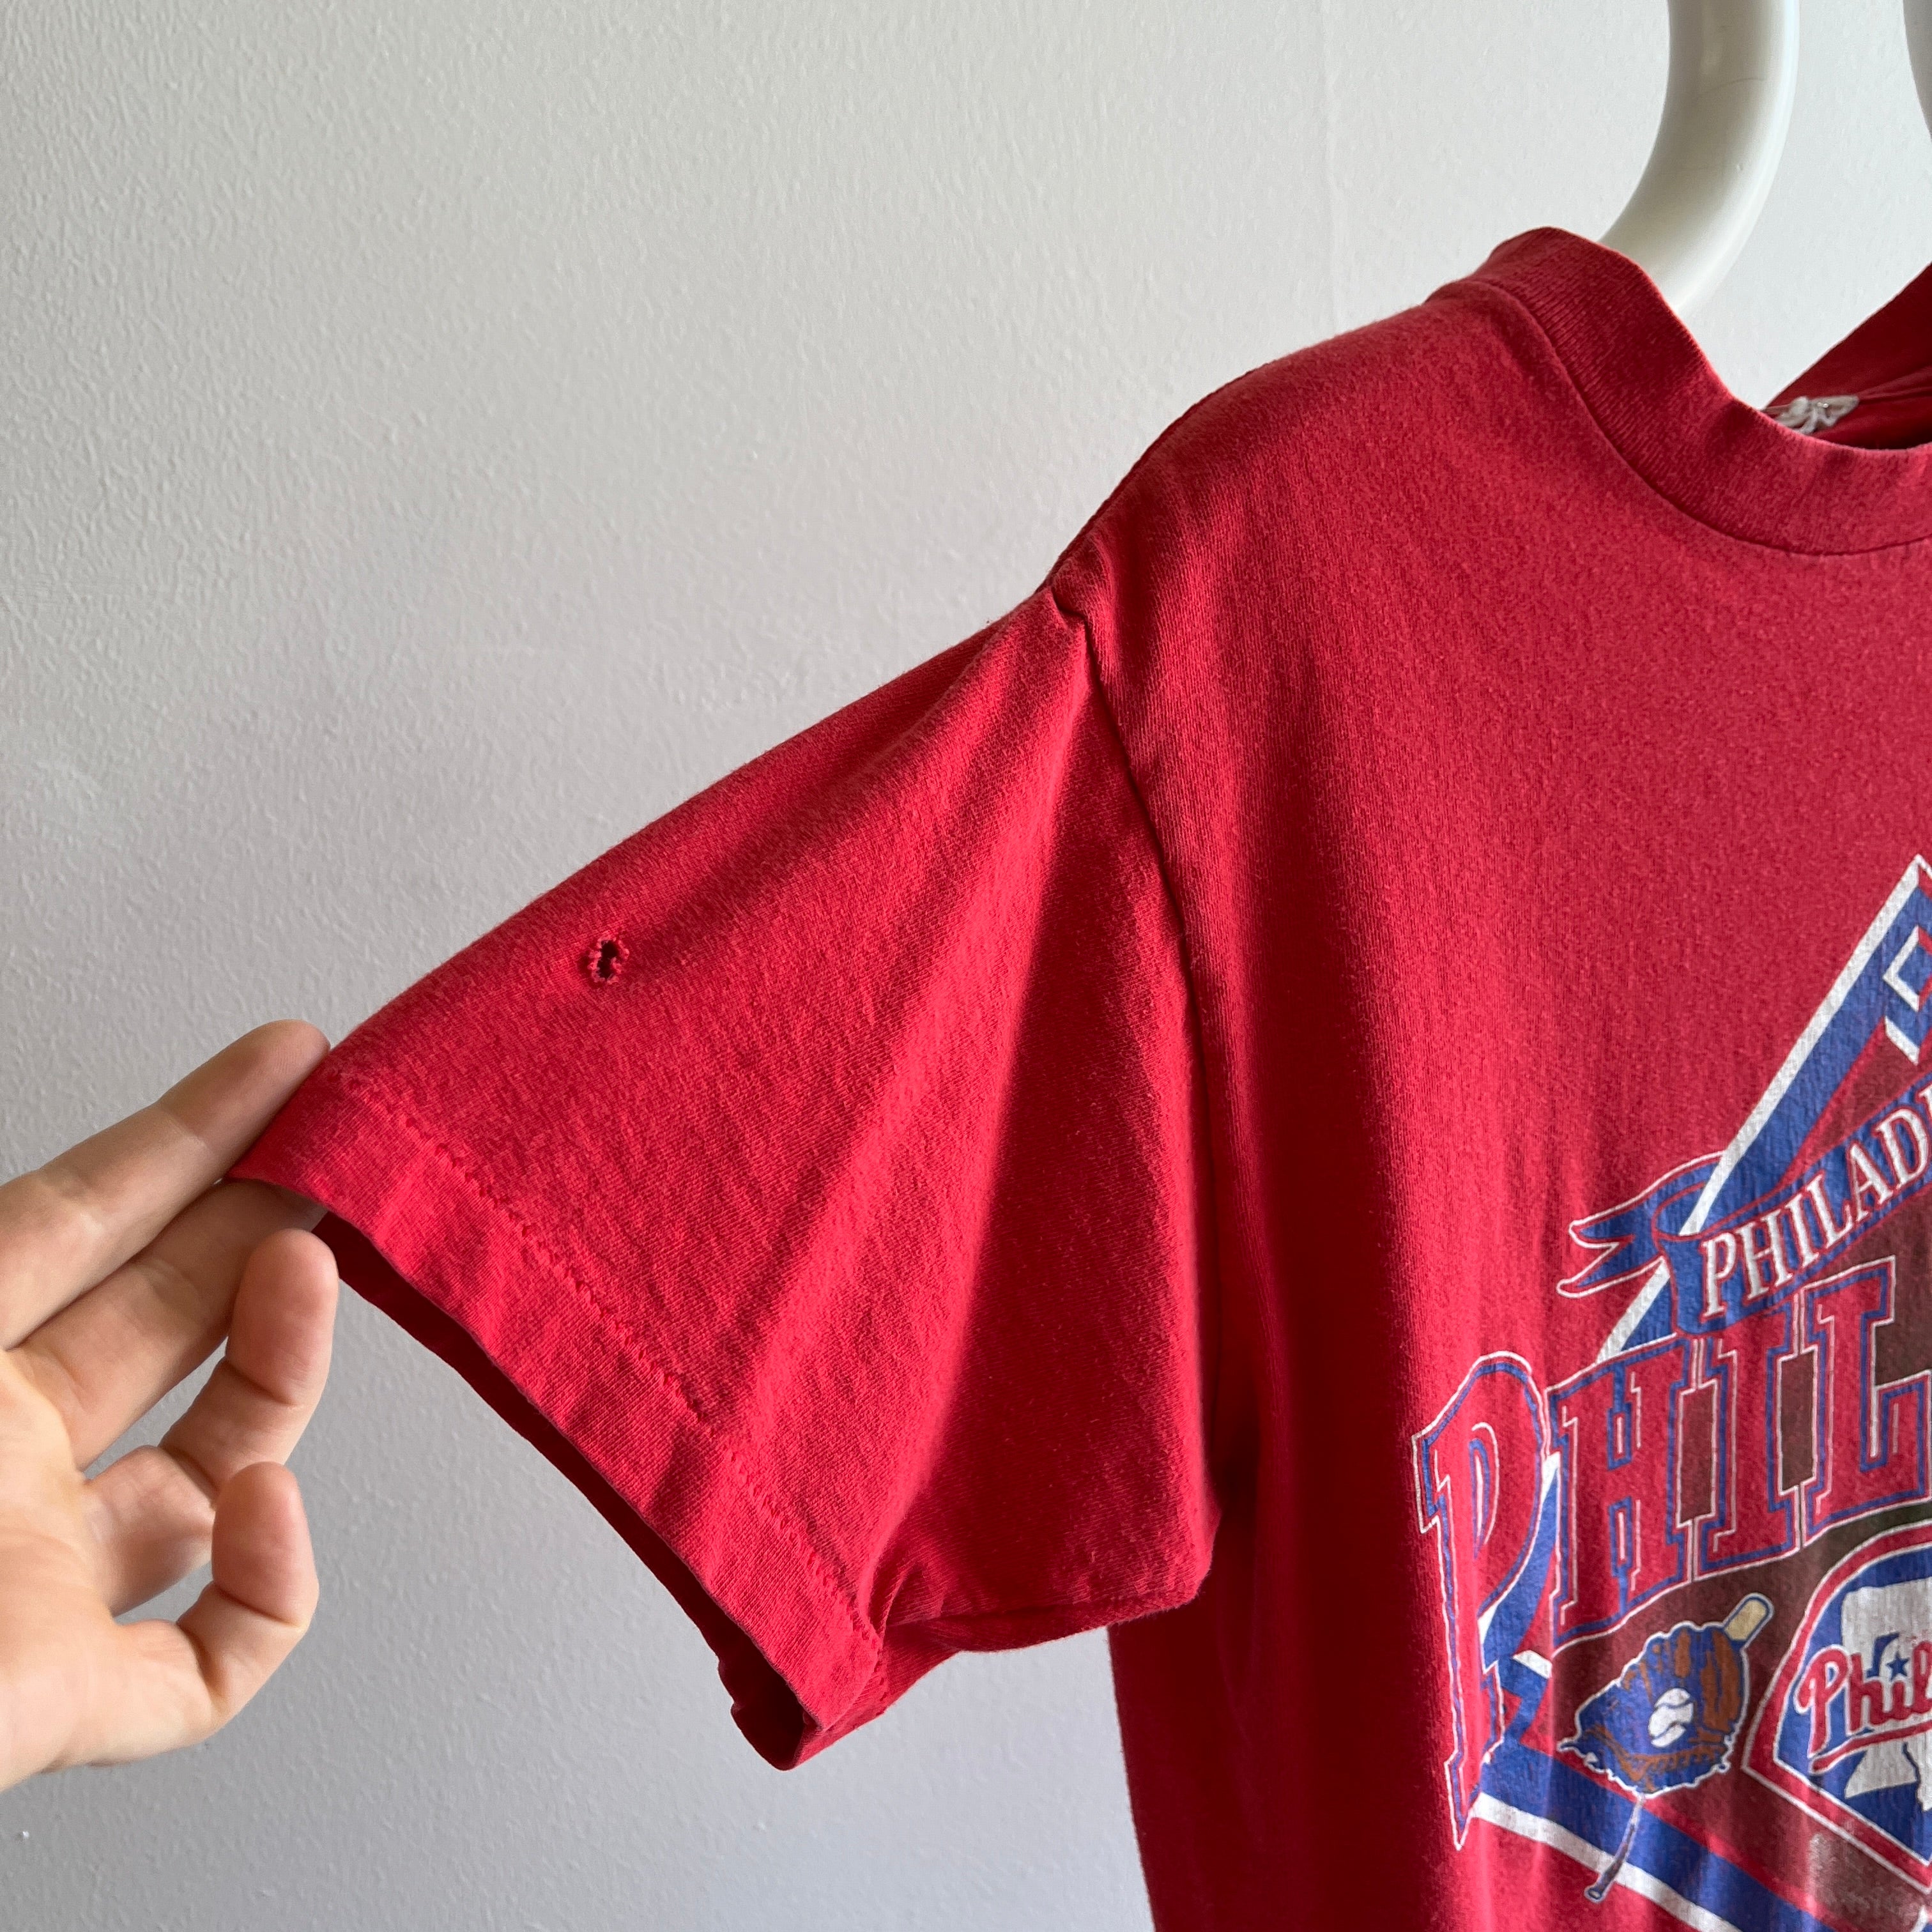 90s Philadelphia Phillies Red White and Blue T-shirt 